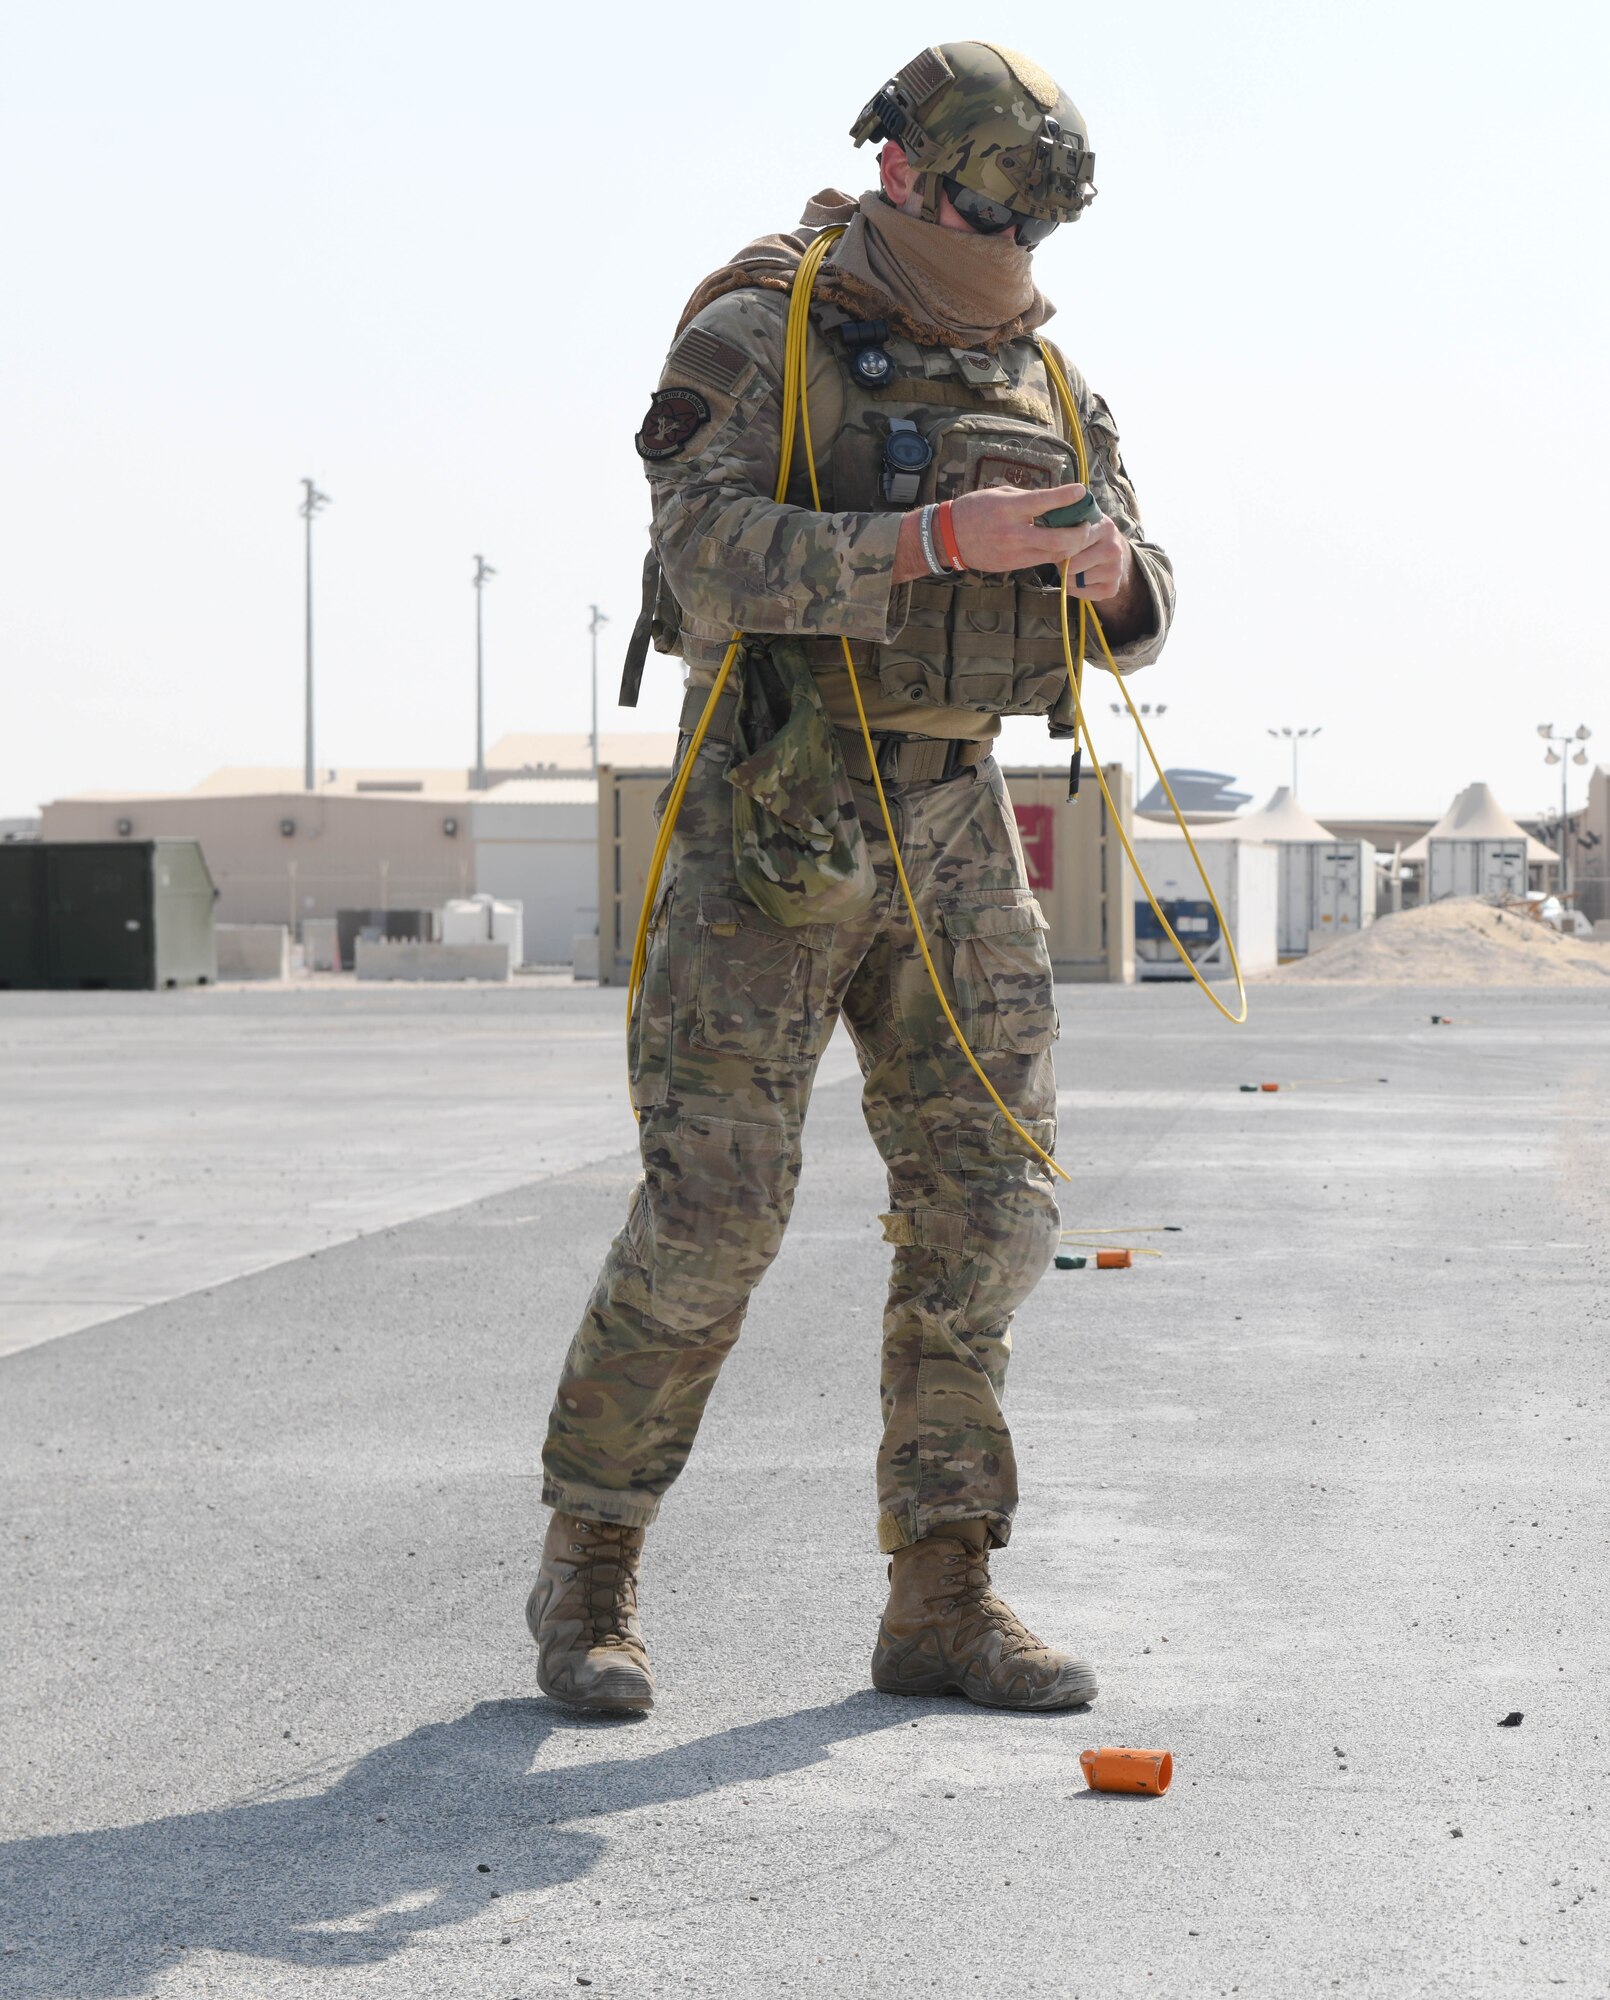 U.S. Air Force Tech. Sgt. Sherwood Johnson IV, 379th Expeditionary Civil Engineer Squadron explosive ordnance disposal branch, prepares a mock explosive while sweeping a training field to clear simulated unexploded ordnance during rapid airfield damage repair training at Al Udeid Air Base, Qatar, Nov. 18, 2020. Johnson and his EOD wingmen participated in the RADR exercise, which prepared 379th ECES to make expeditious repairs to an airfield after it has sustained damage during an attack. (U.S. Air Force photo by Staff Sgt. Kayla White)